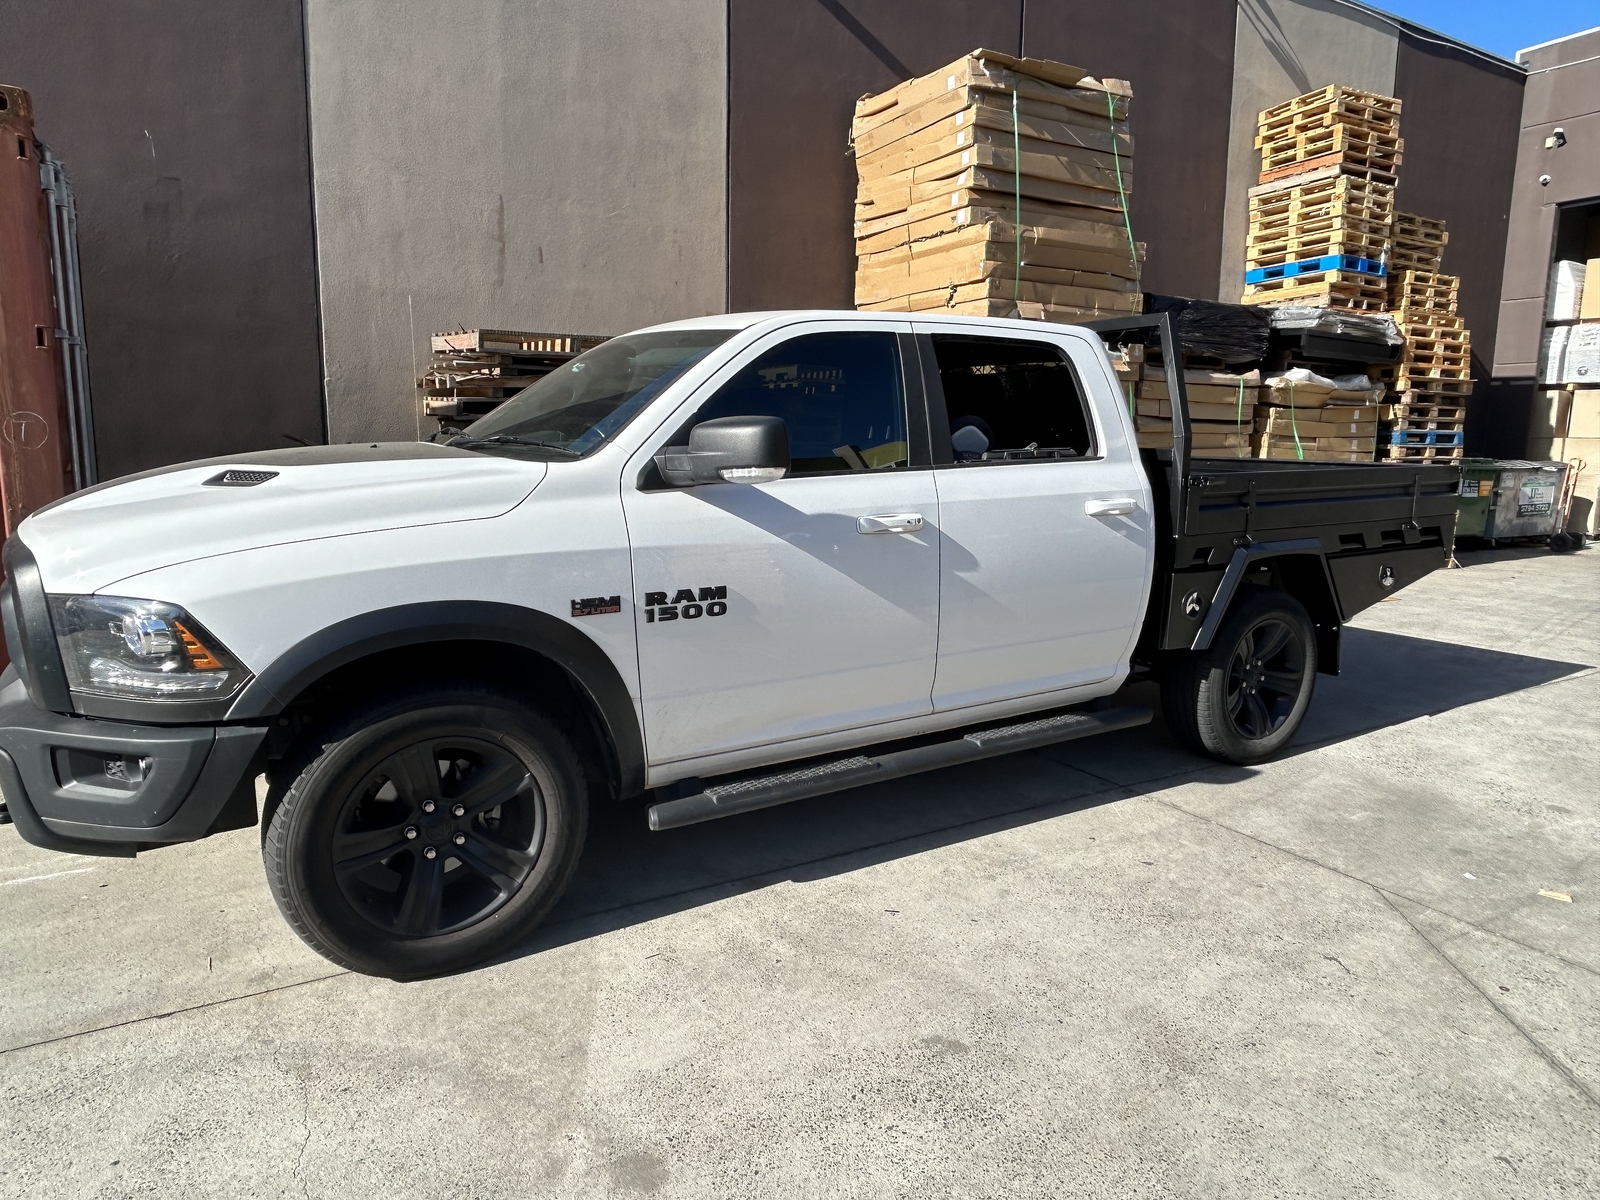 Ram 1500 Ute Tray and Toolboxes Setup